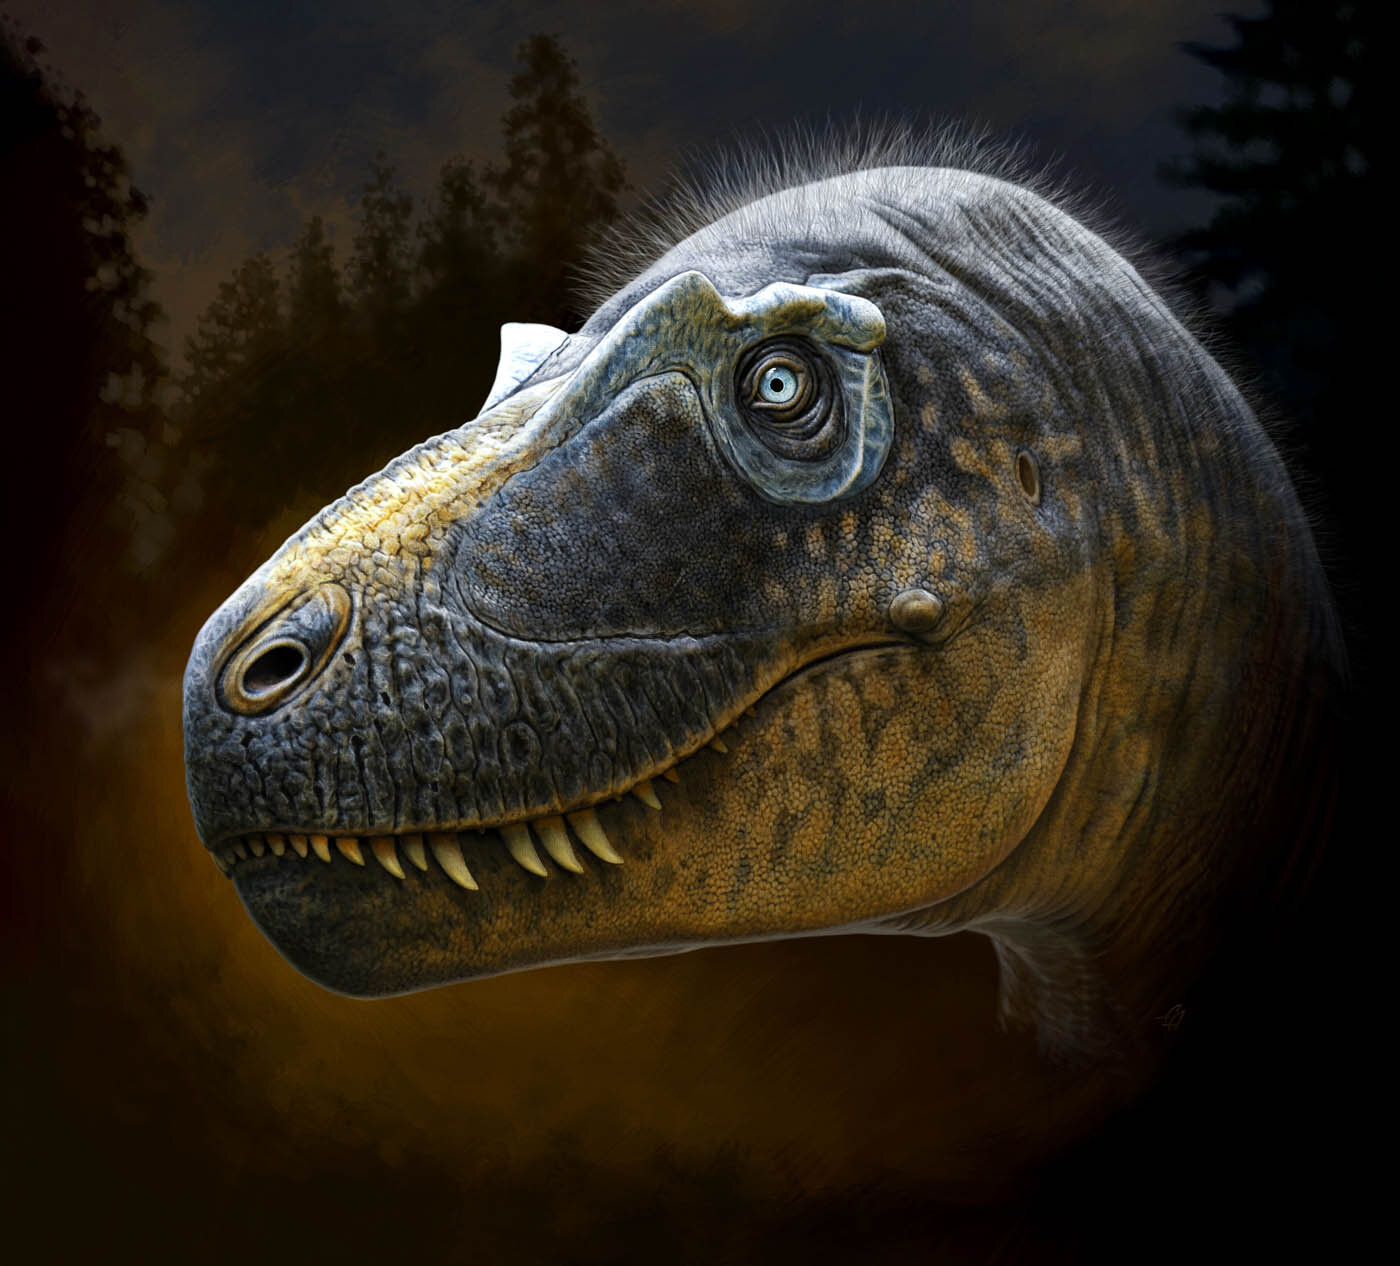 Closest relative of Tyrannosaurus rex discovered in New Mexico